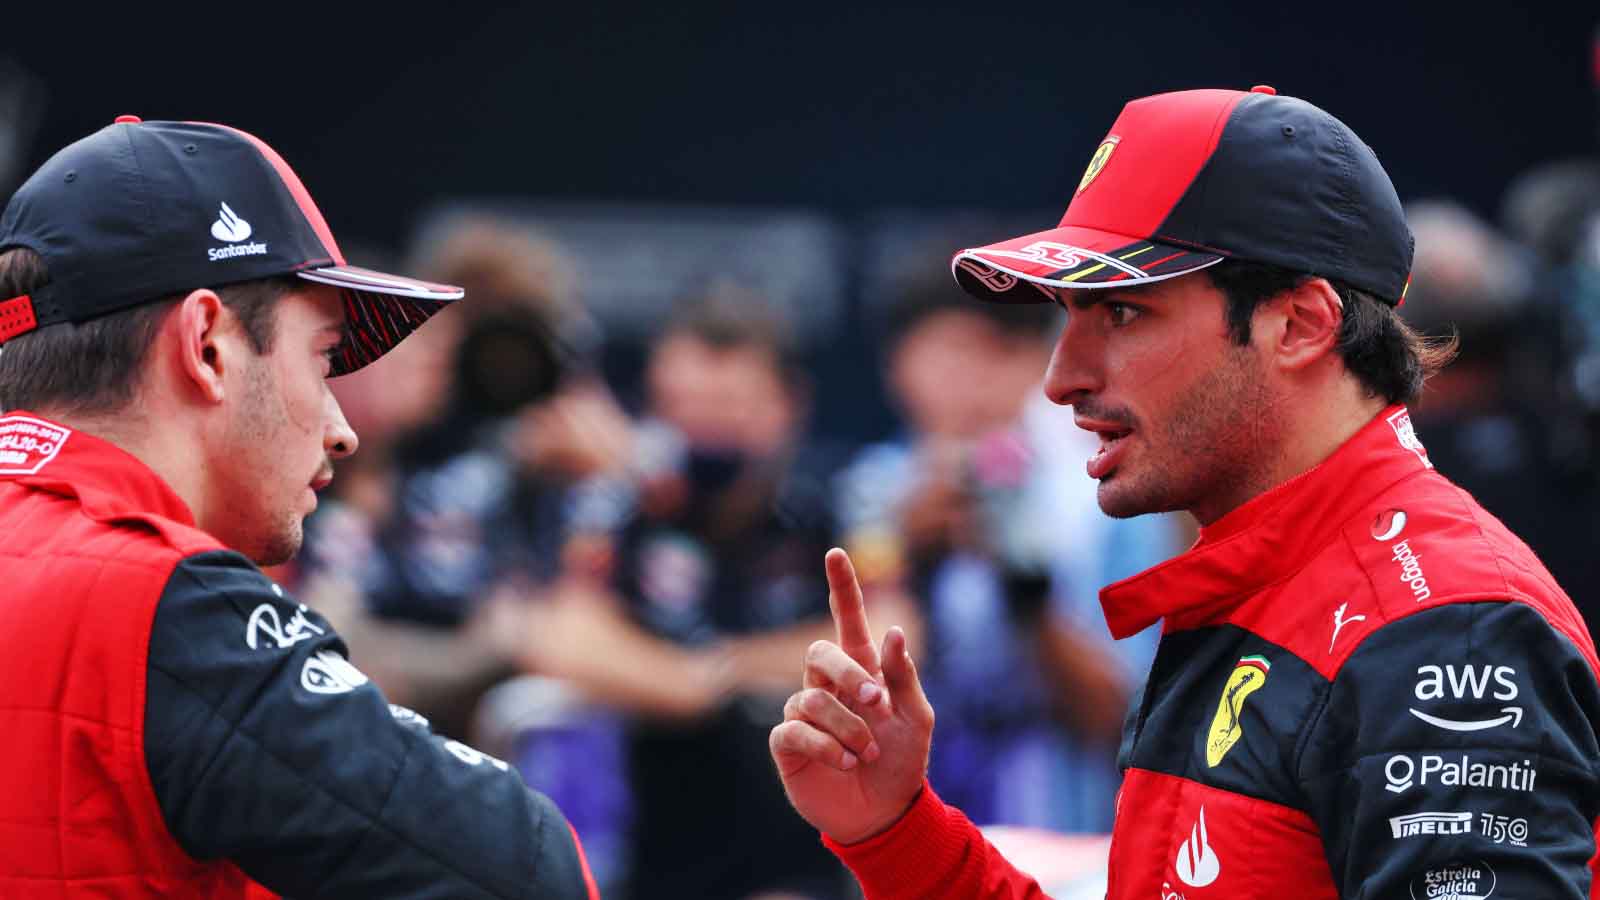 Charles Leclerc and Carlos Sainz after qualifying. Suzuka October 2022.